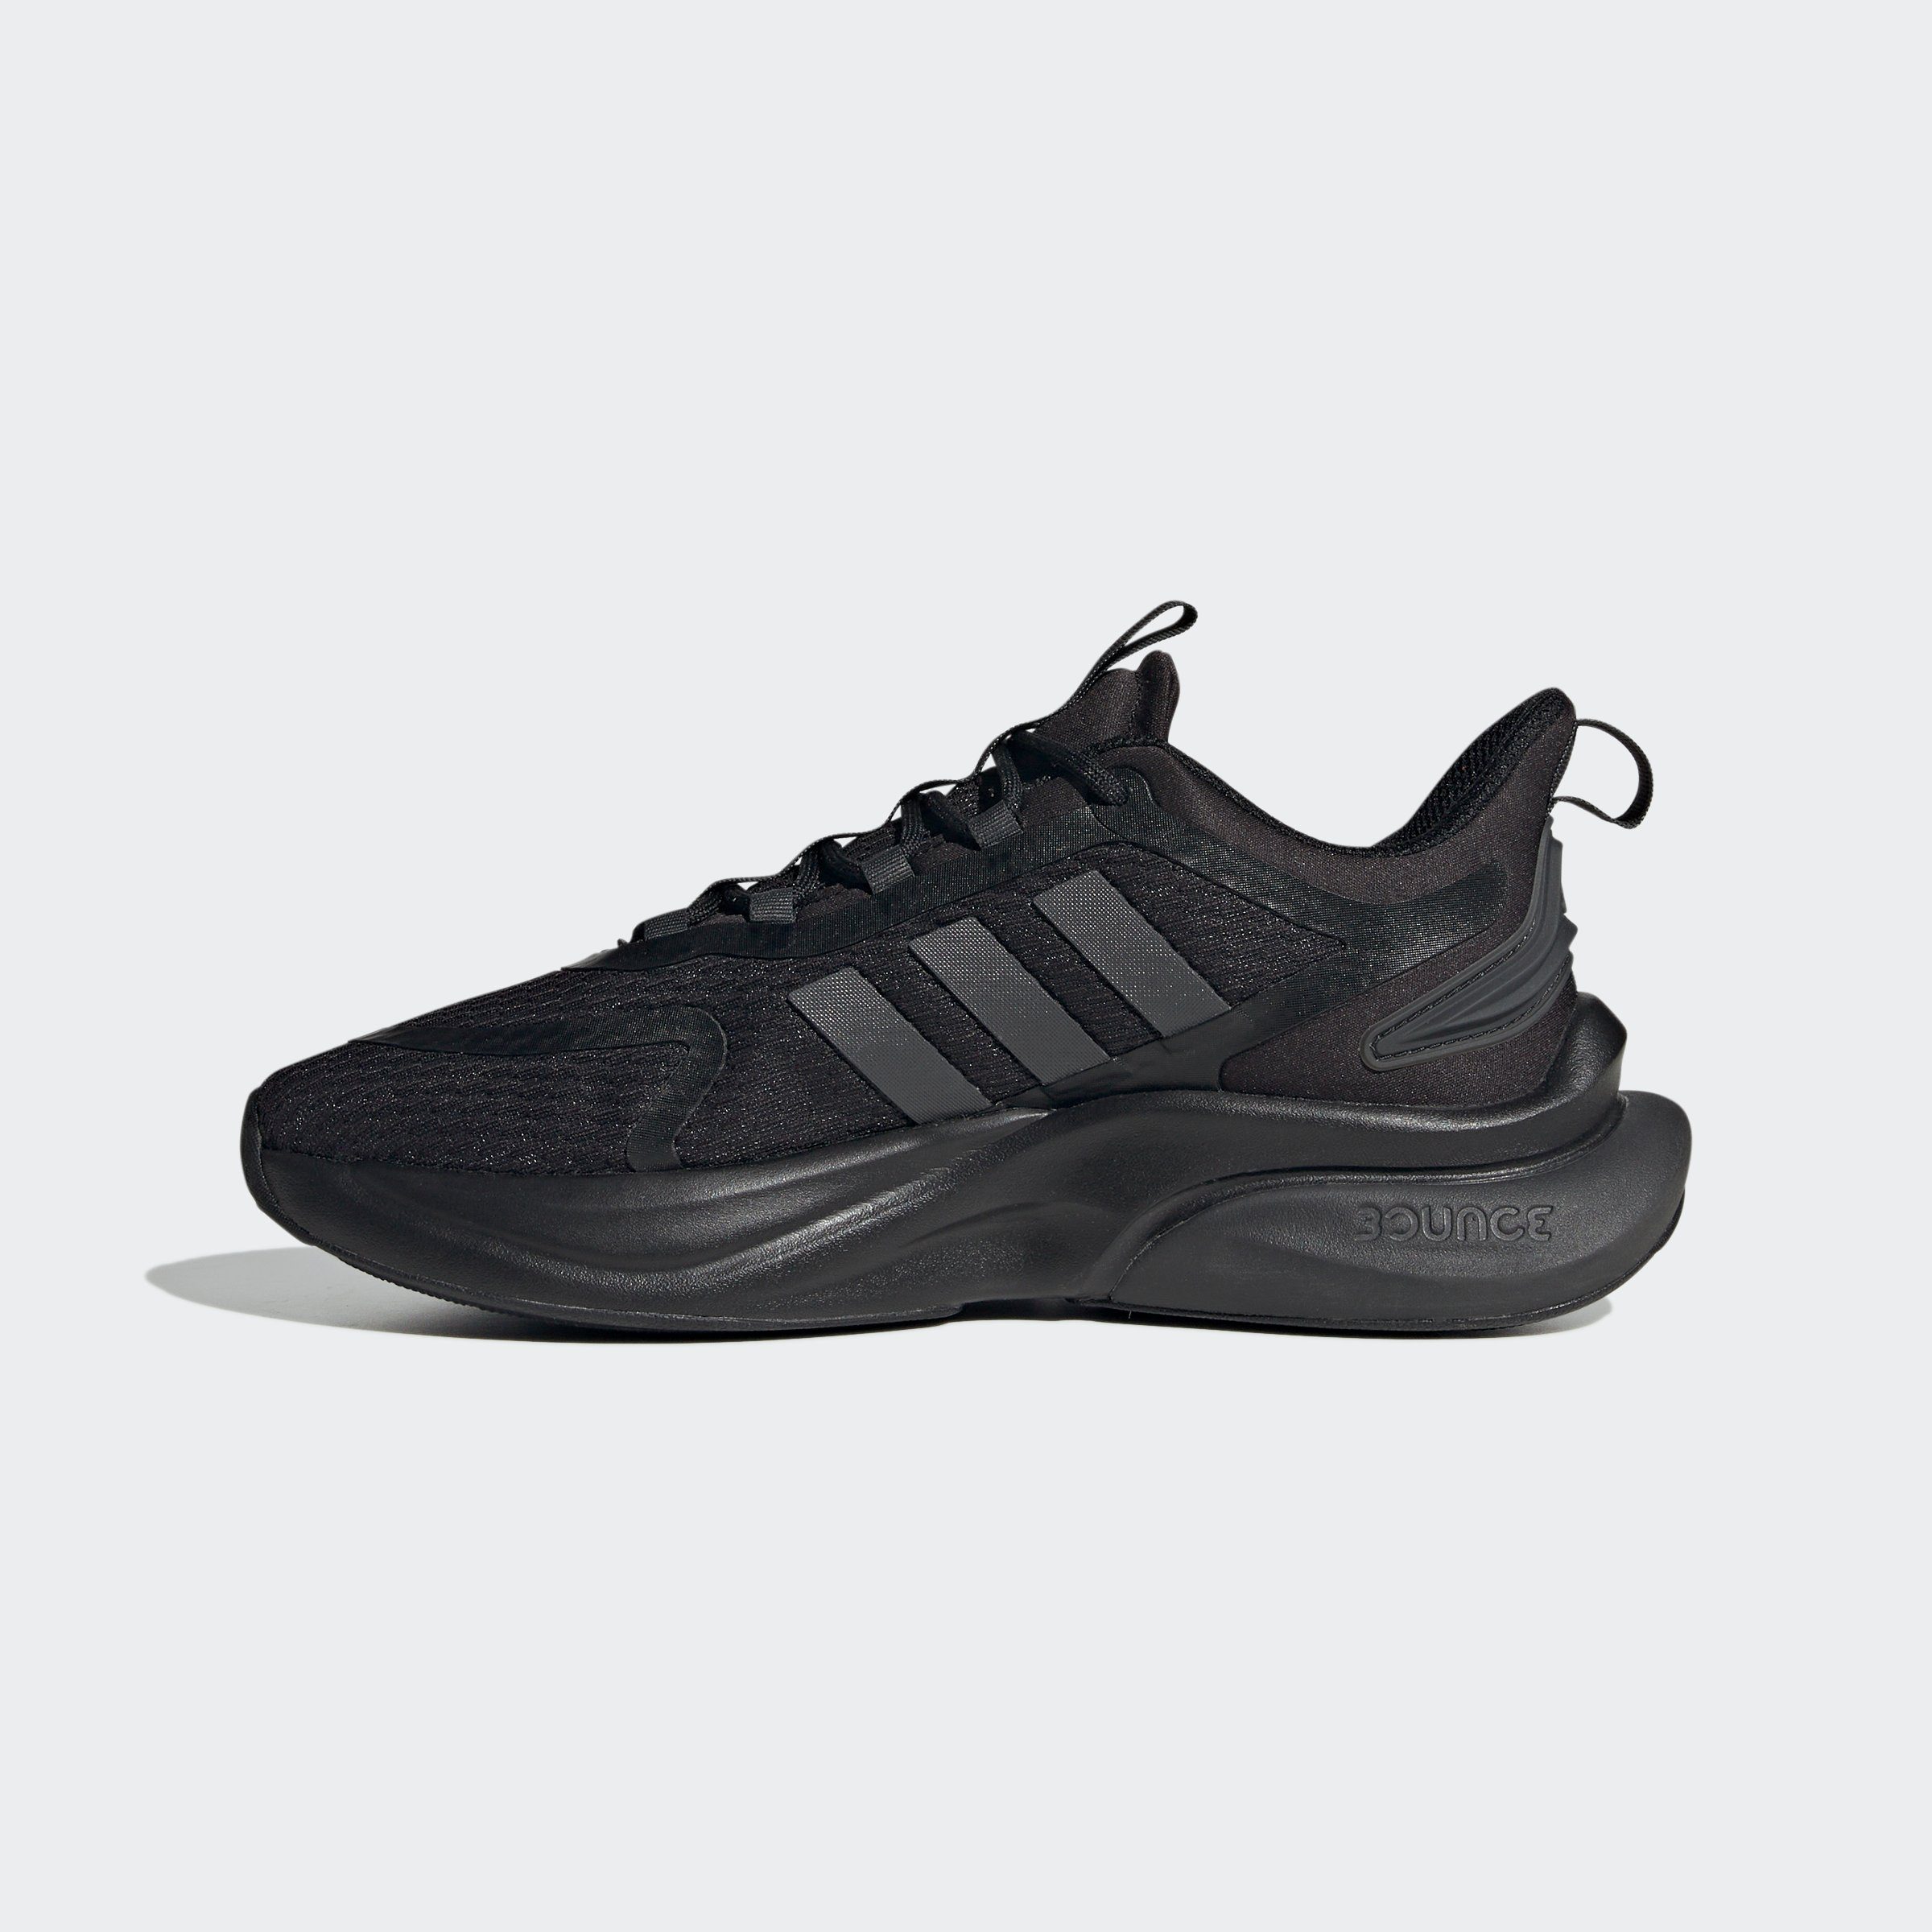 adidas Sportswear ALPHABOUNCE+ Black Core / Sneaker SUSTAINABLE / Carbon Metallic BOUNCE Gold